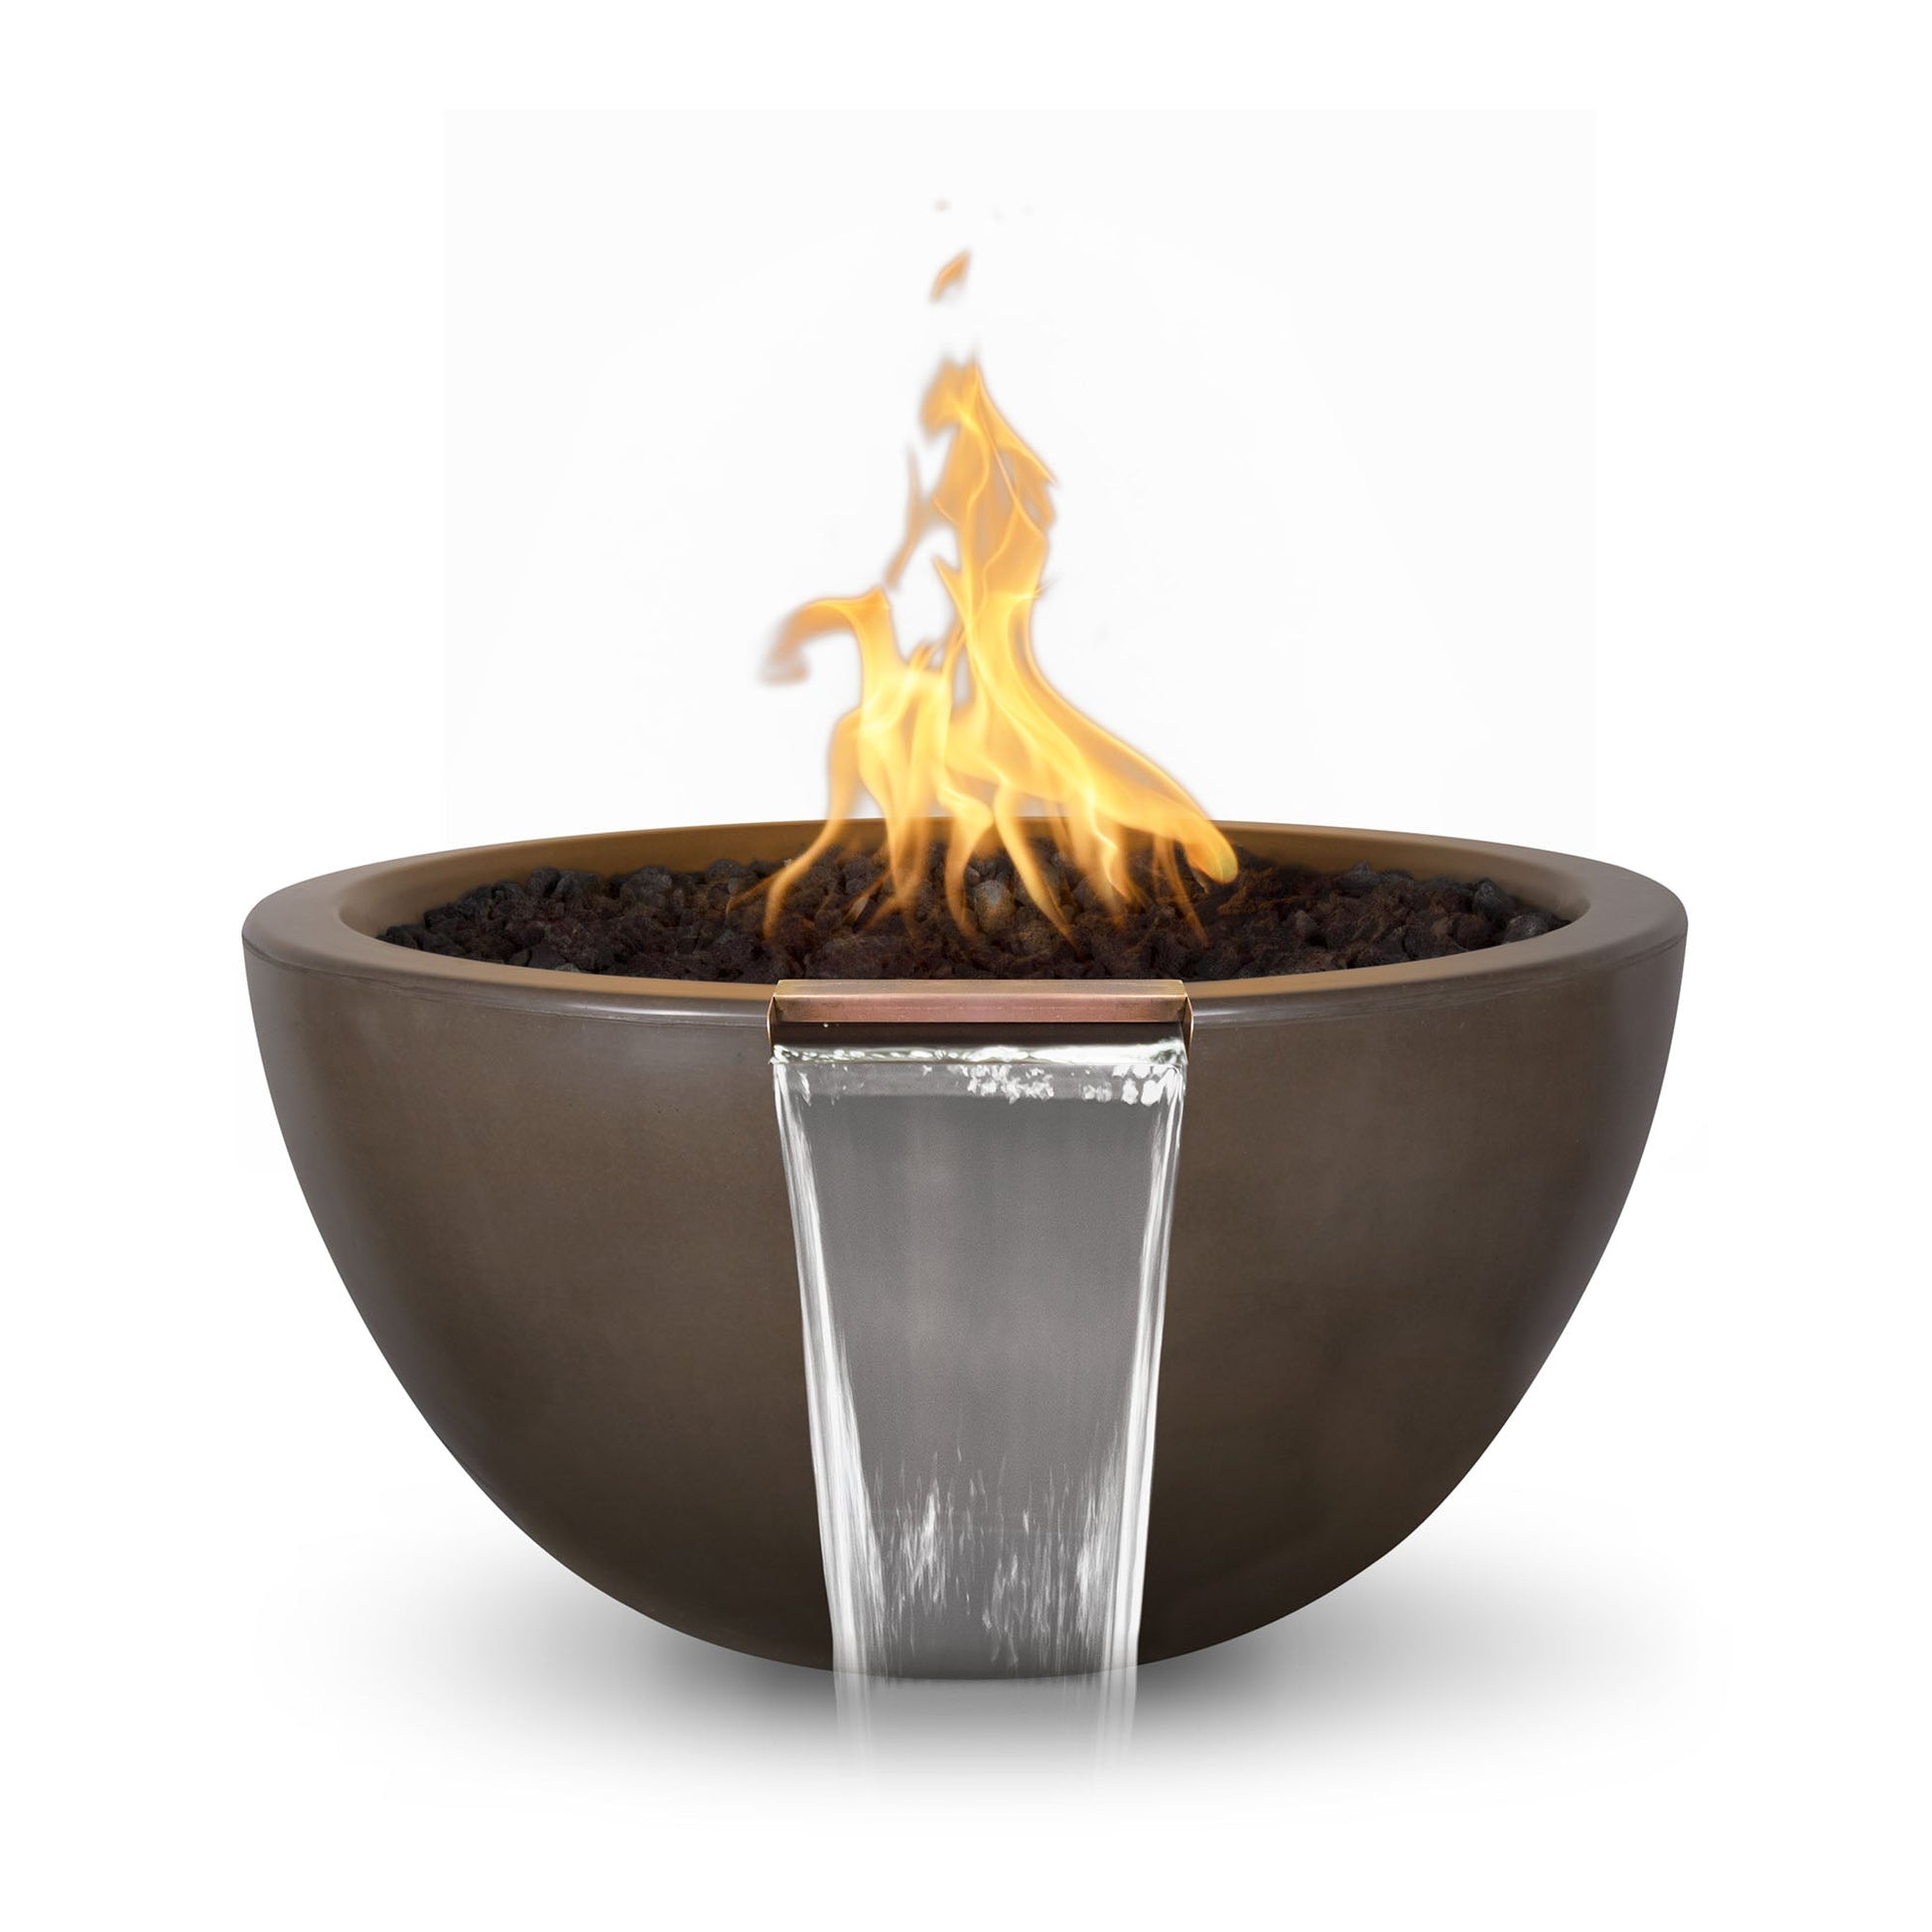 The Outdoor Plus Round Luna 30" Ash GFRC Concrete Natural Gas Fire & Water Bowl with Match Lit with Flame Sense Ignition